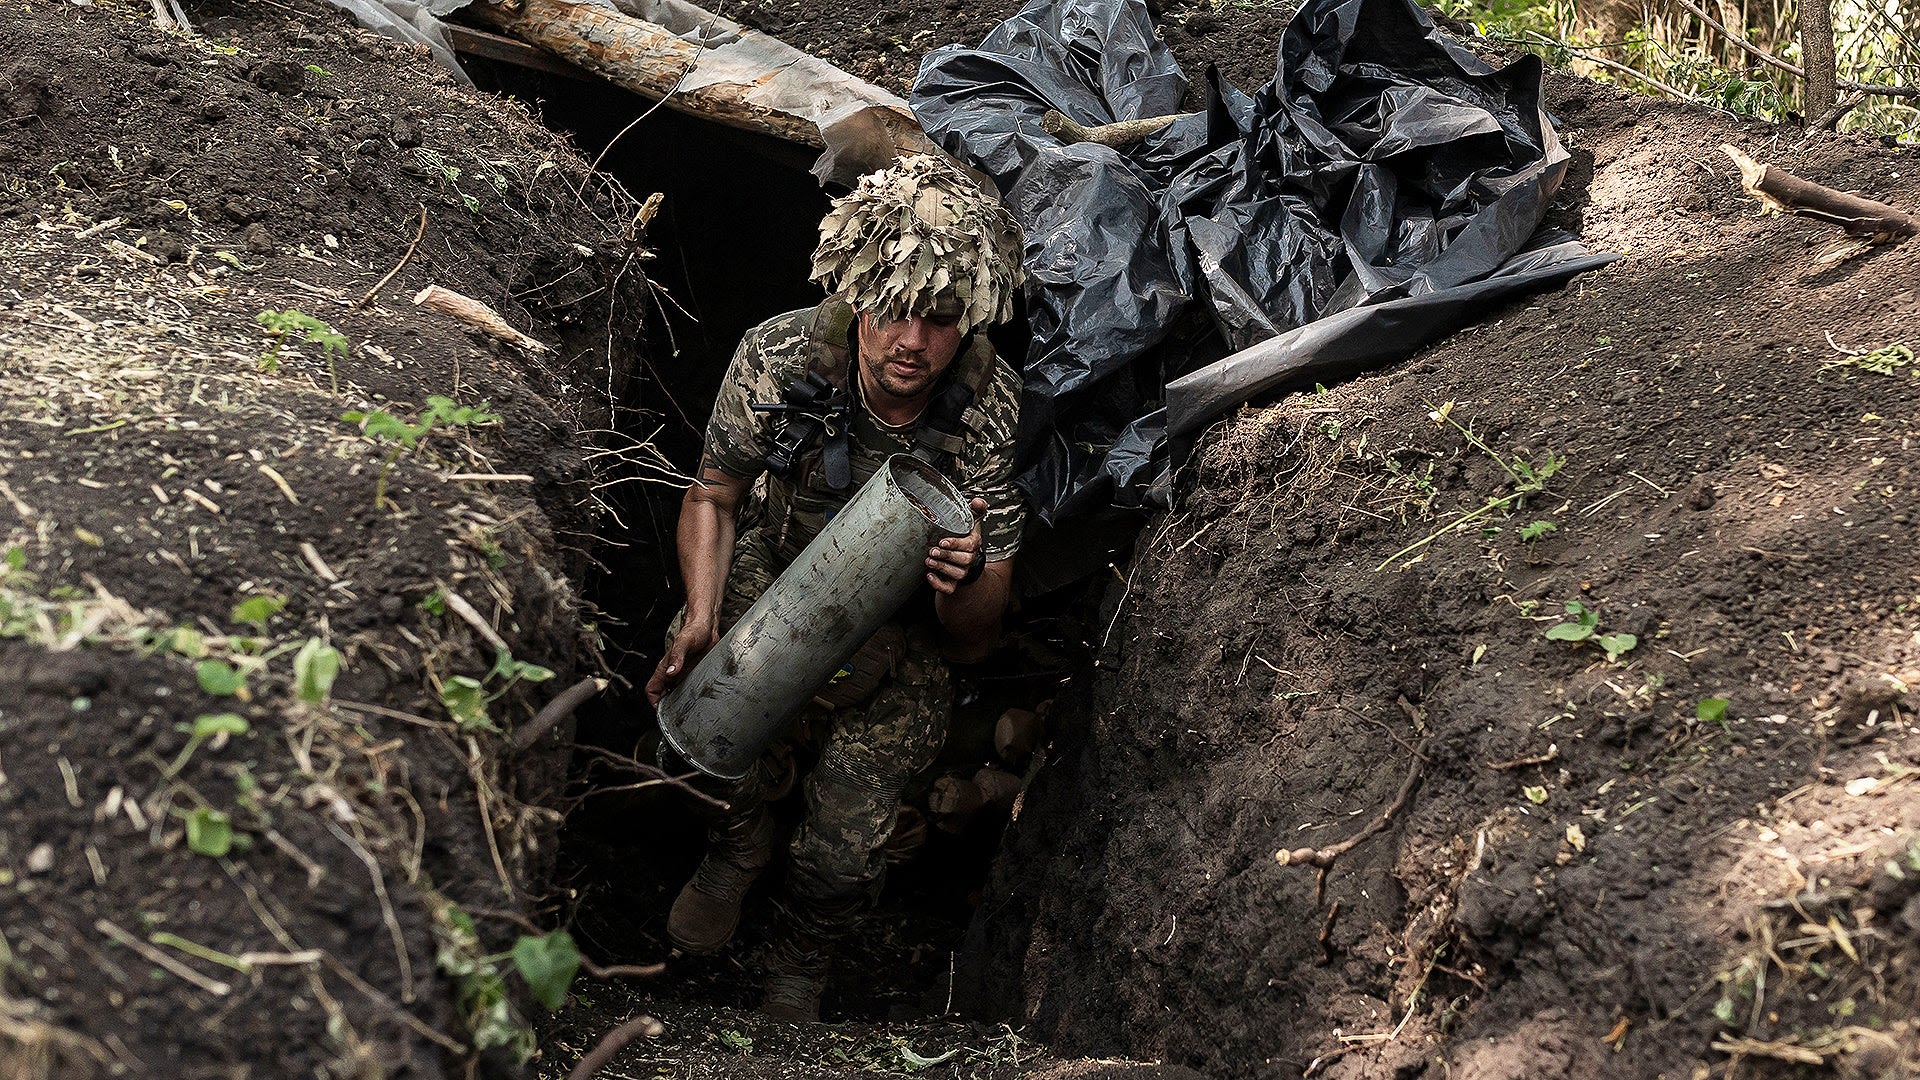 Ukraine Situation Report: Kyiv’s Forces Push Back In Kharkiv